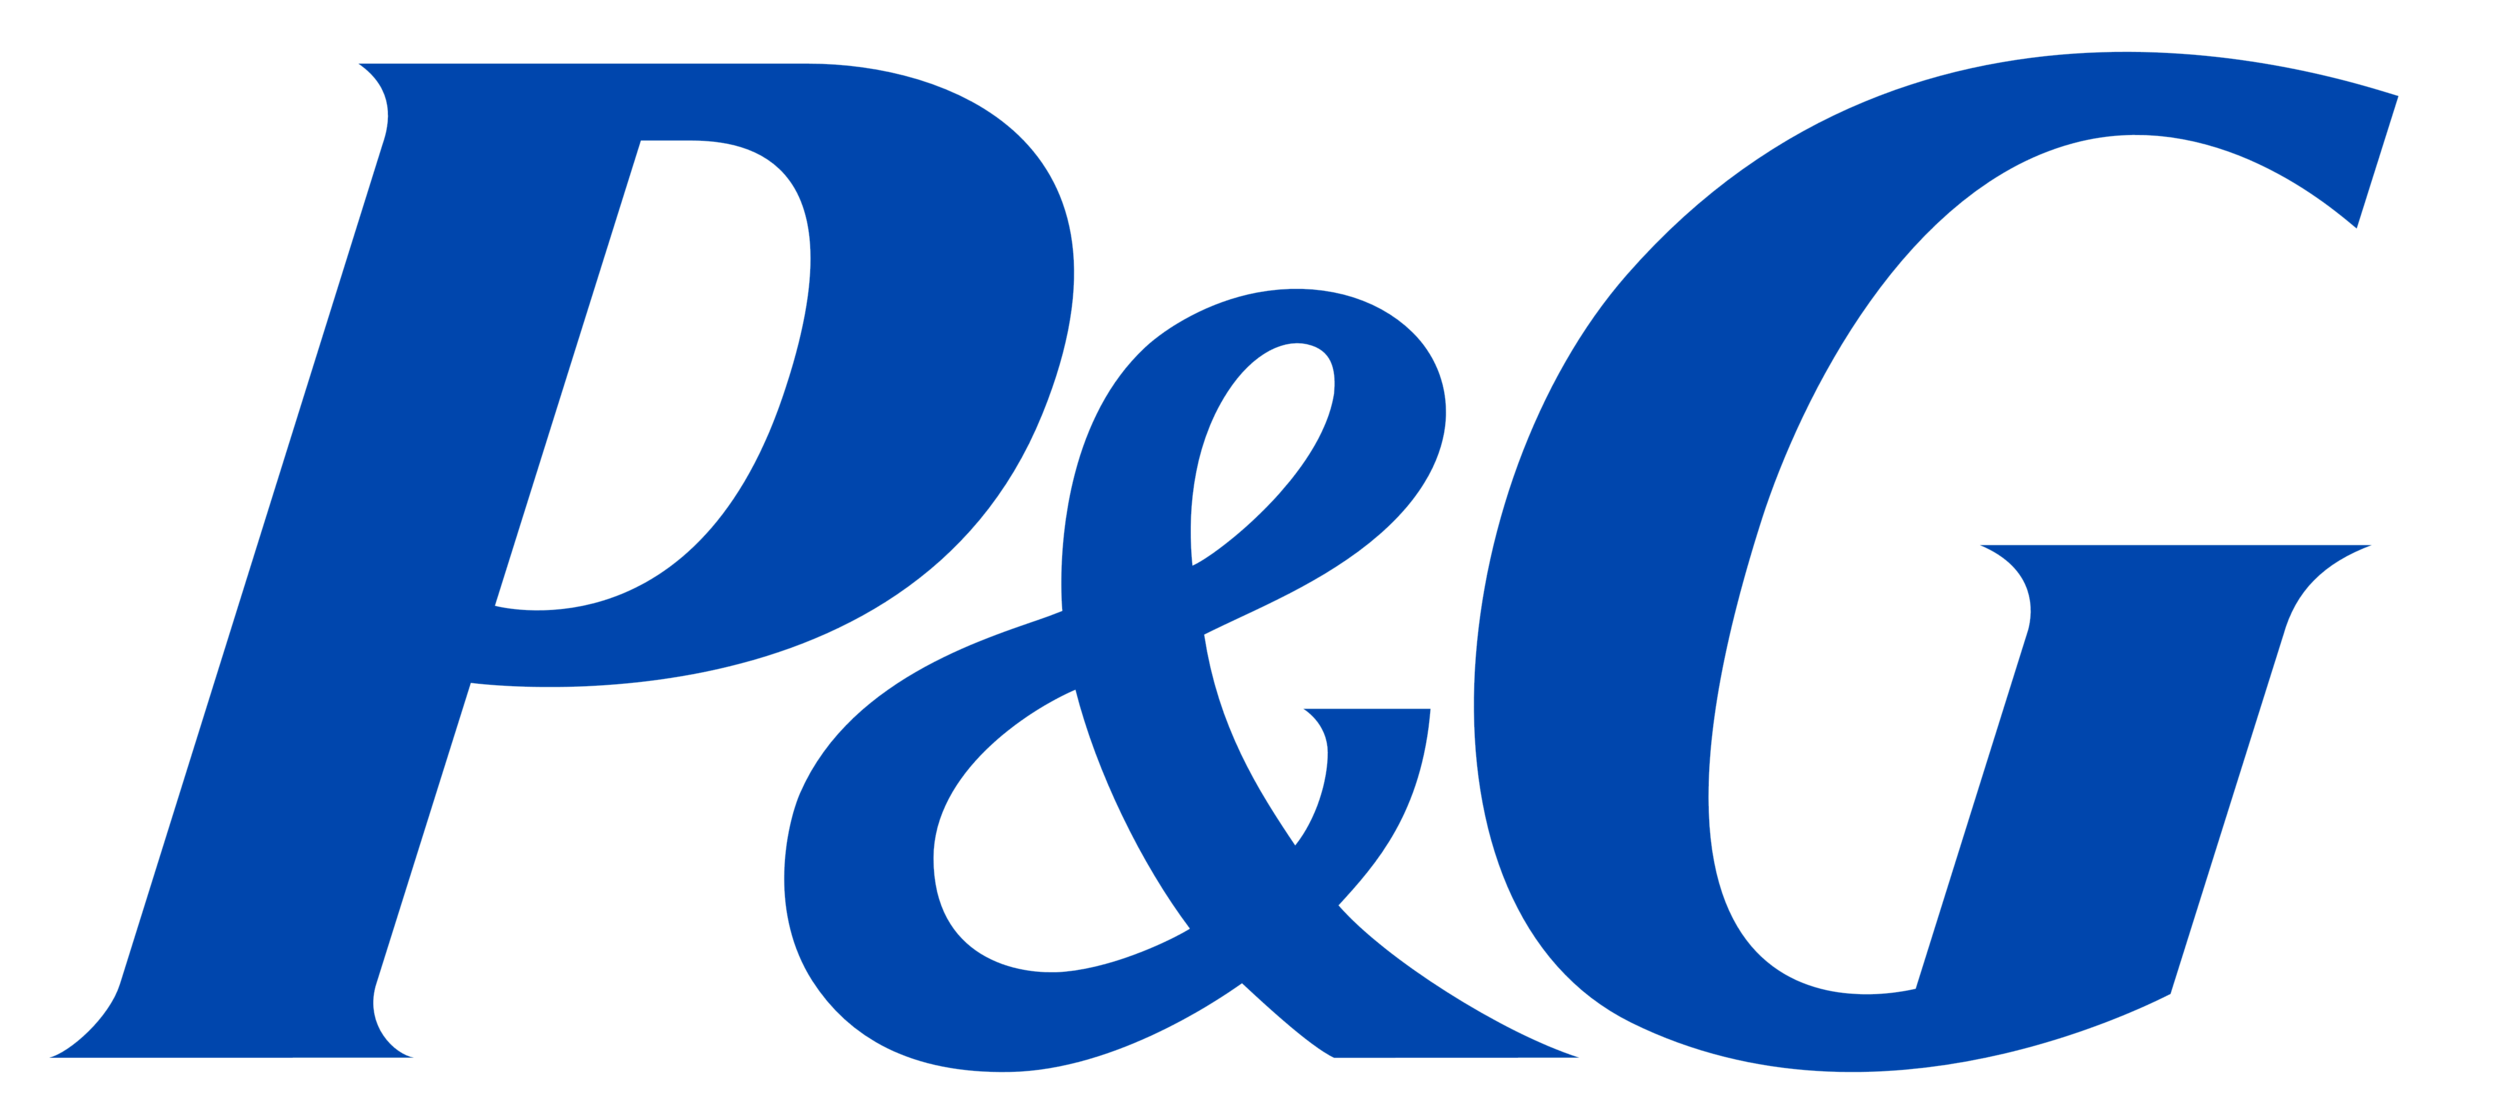 P_and_G_Procter_and_Gamble_logo.png